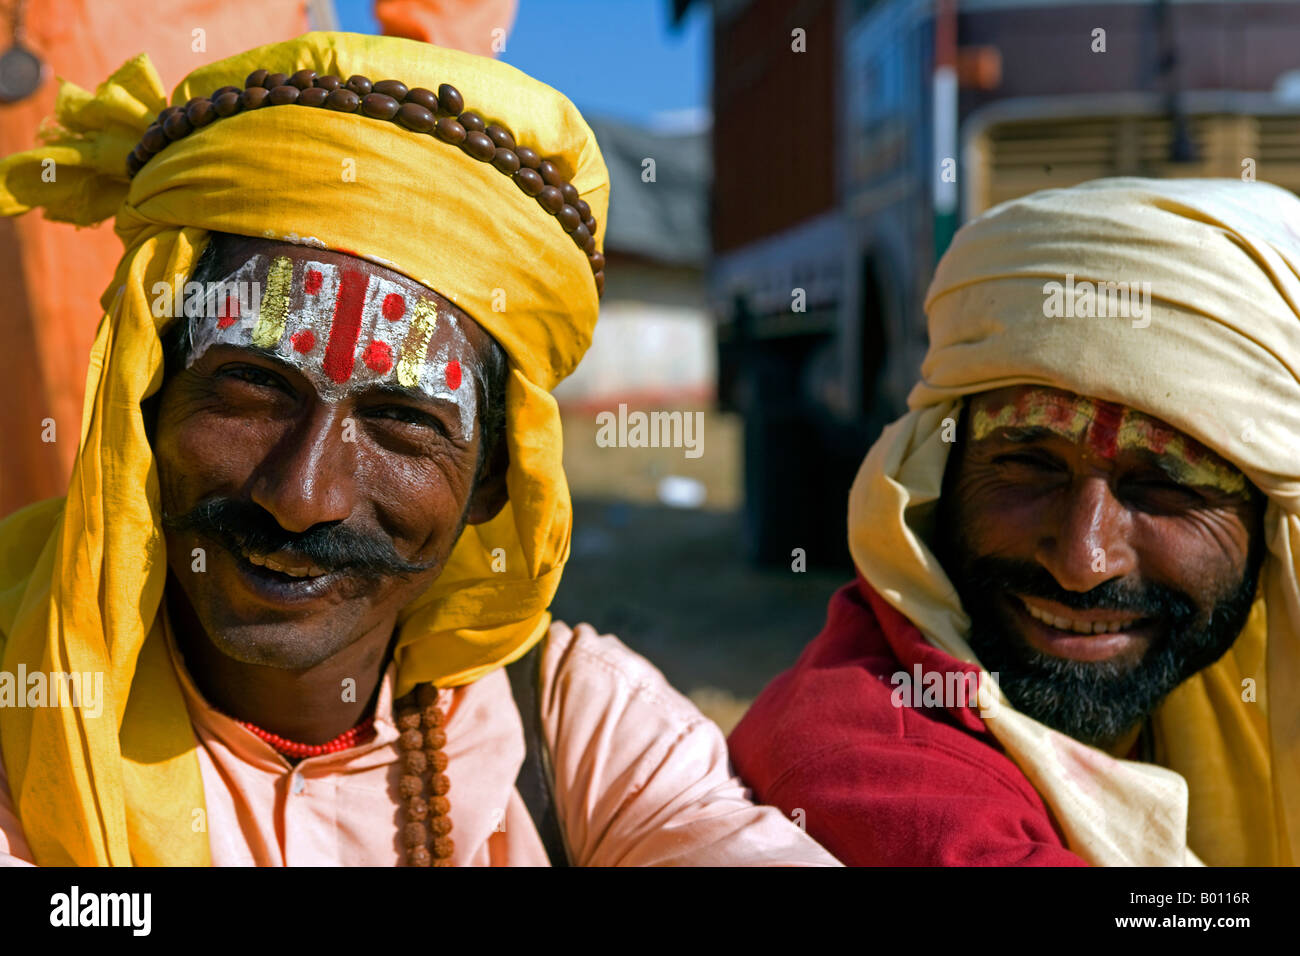 India, Rajasthan, Pushkar. Pilrgrims at the world's largest camel fair, colourful and content with their day. Stock Photo